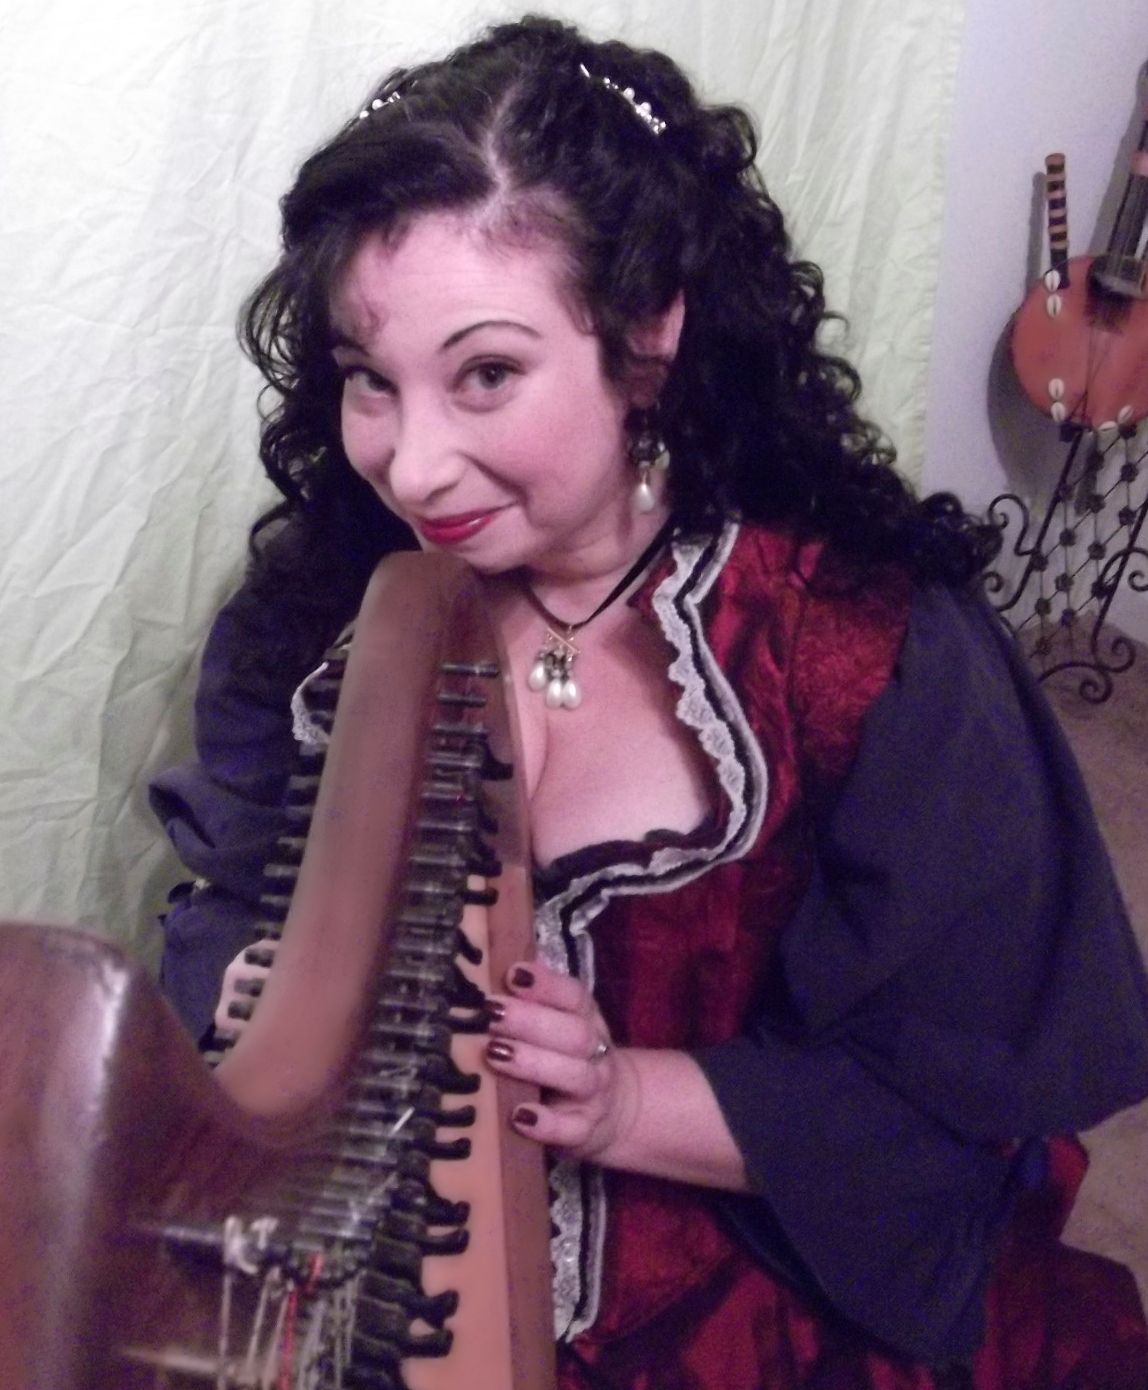 In live theater, I often play my harp.